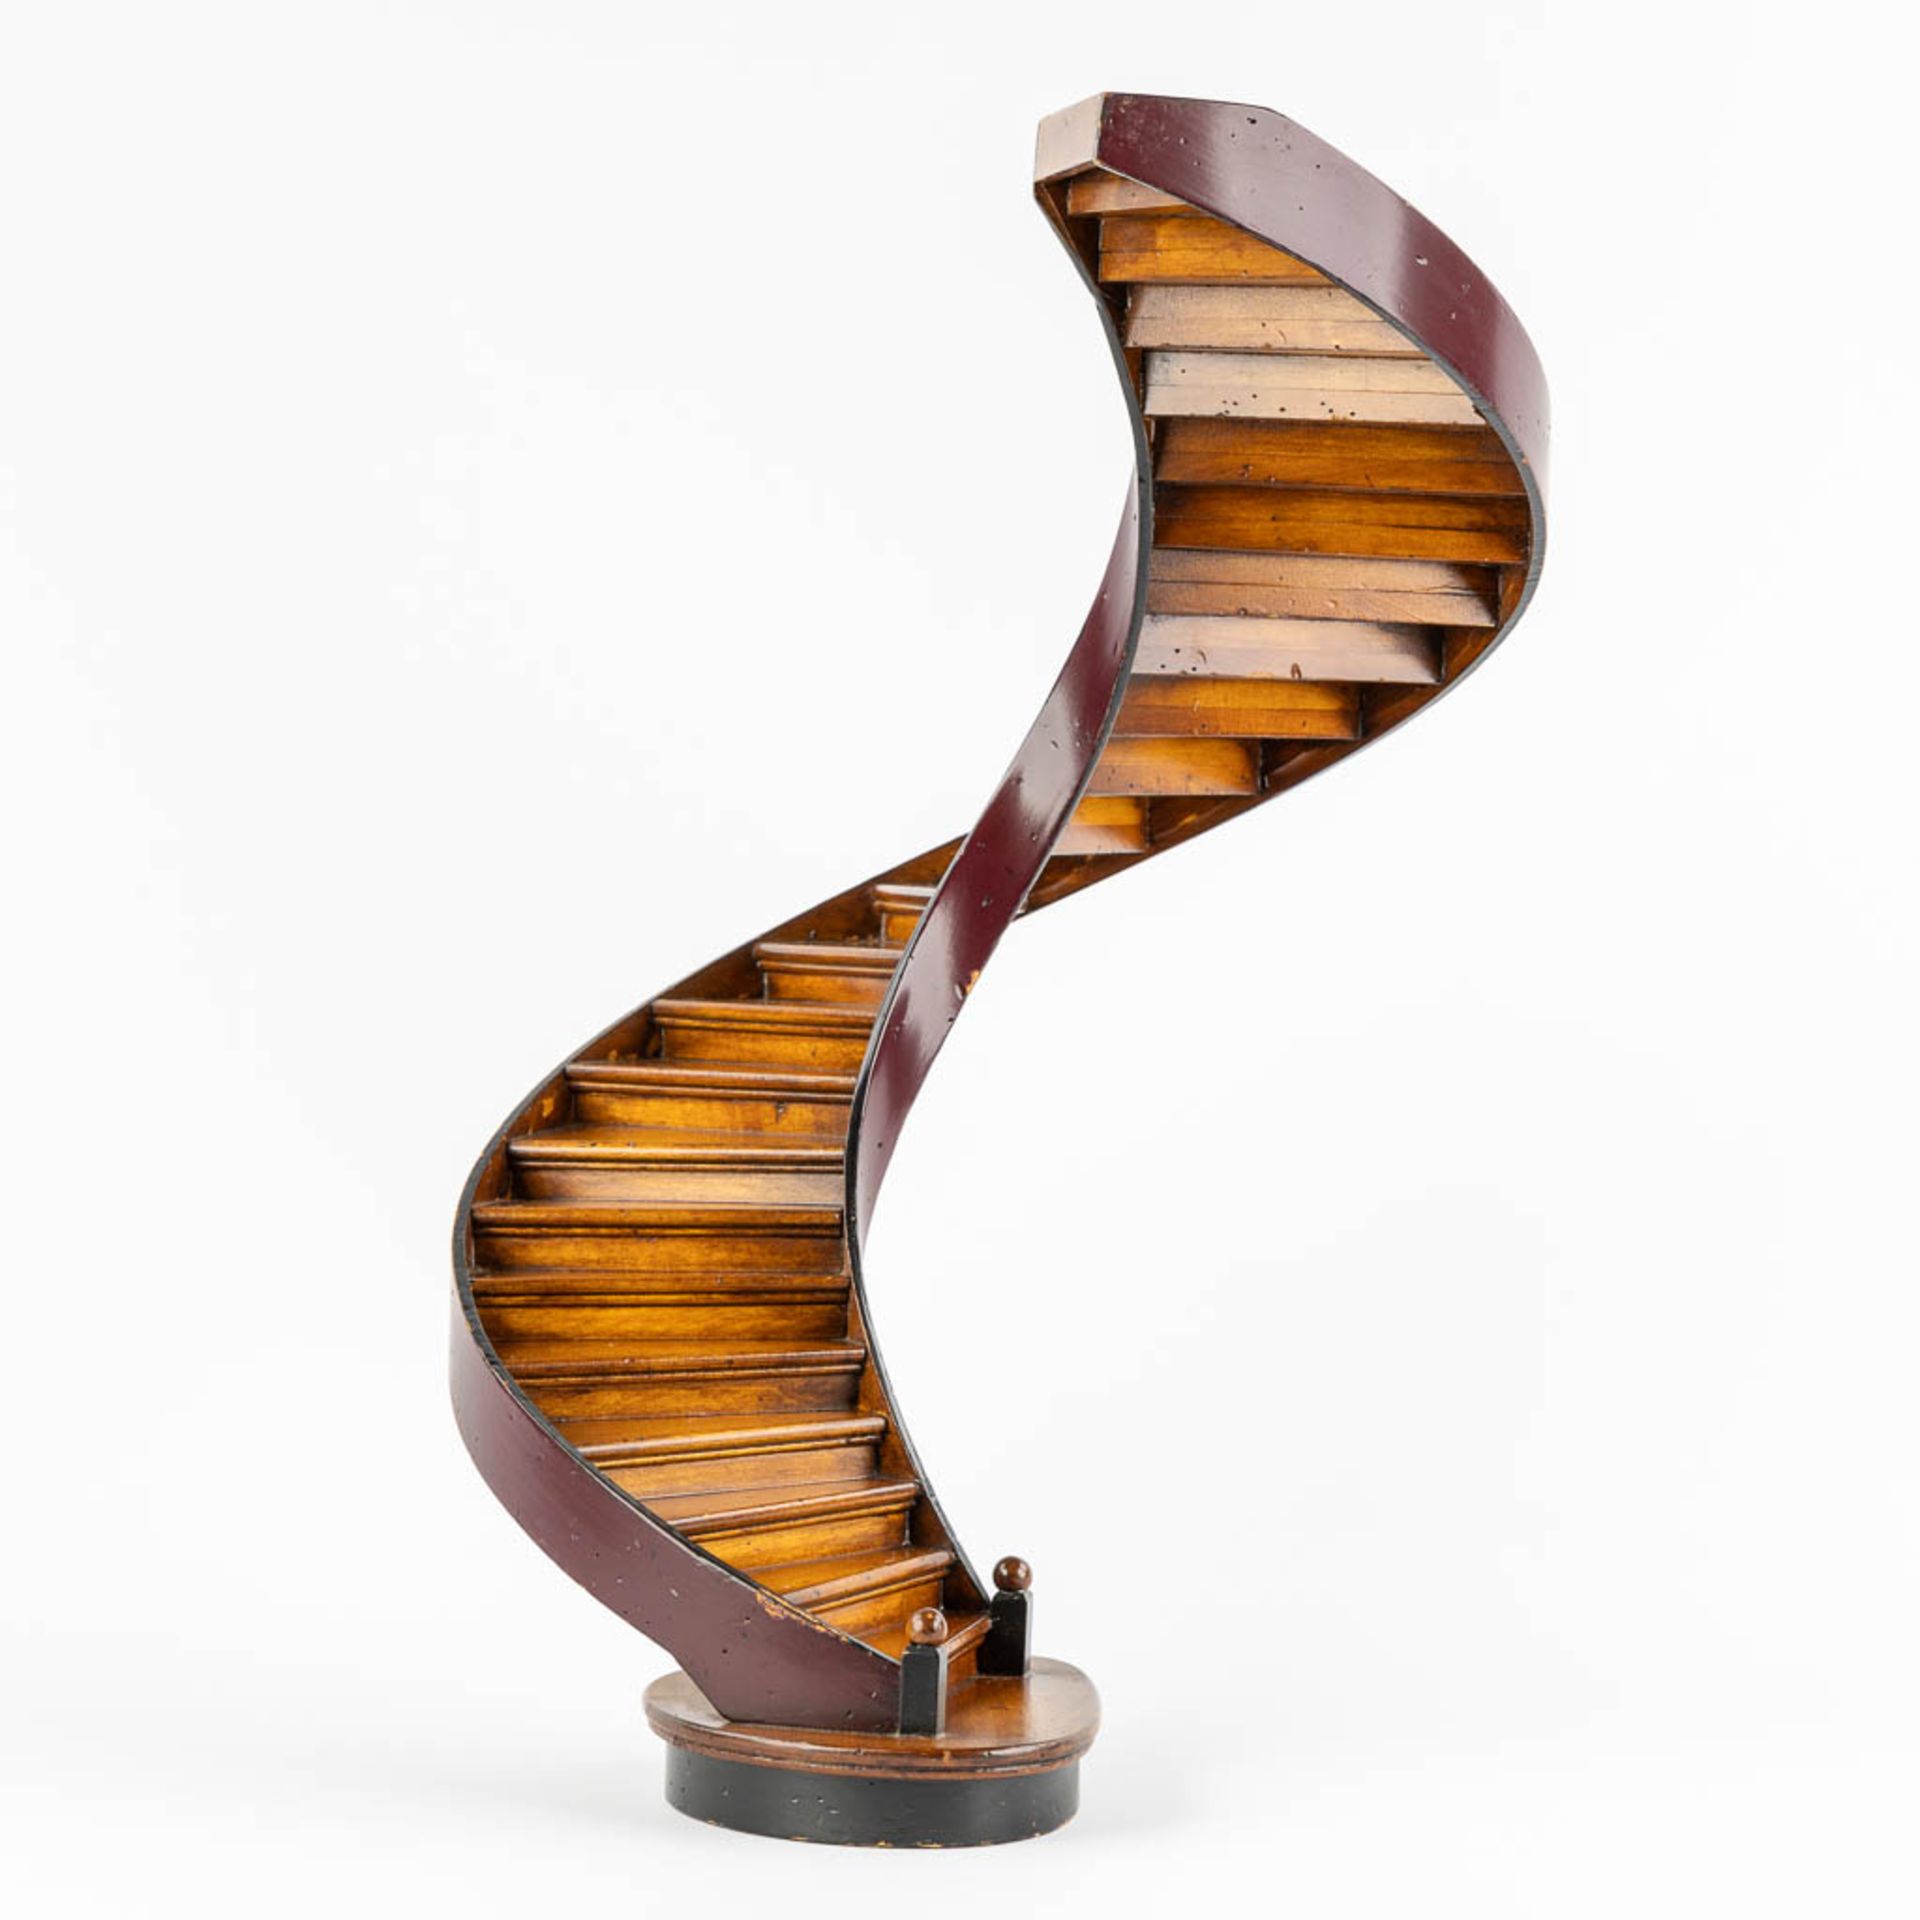 An architectural model of a revolving staircase, wood. 20th C. (H:47,5 x D:29 cm) - Image 6 of 11